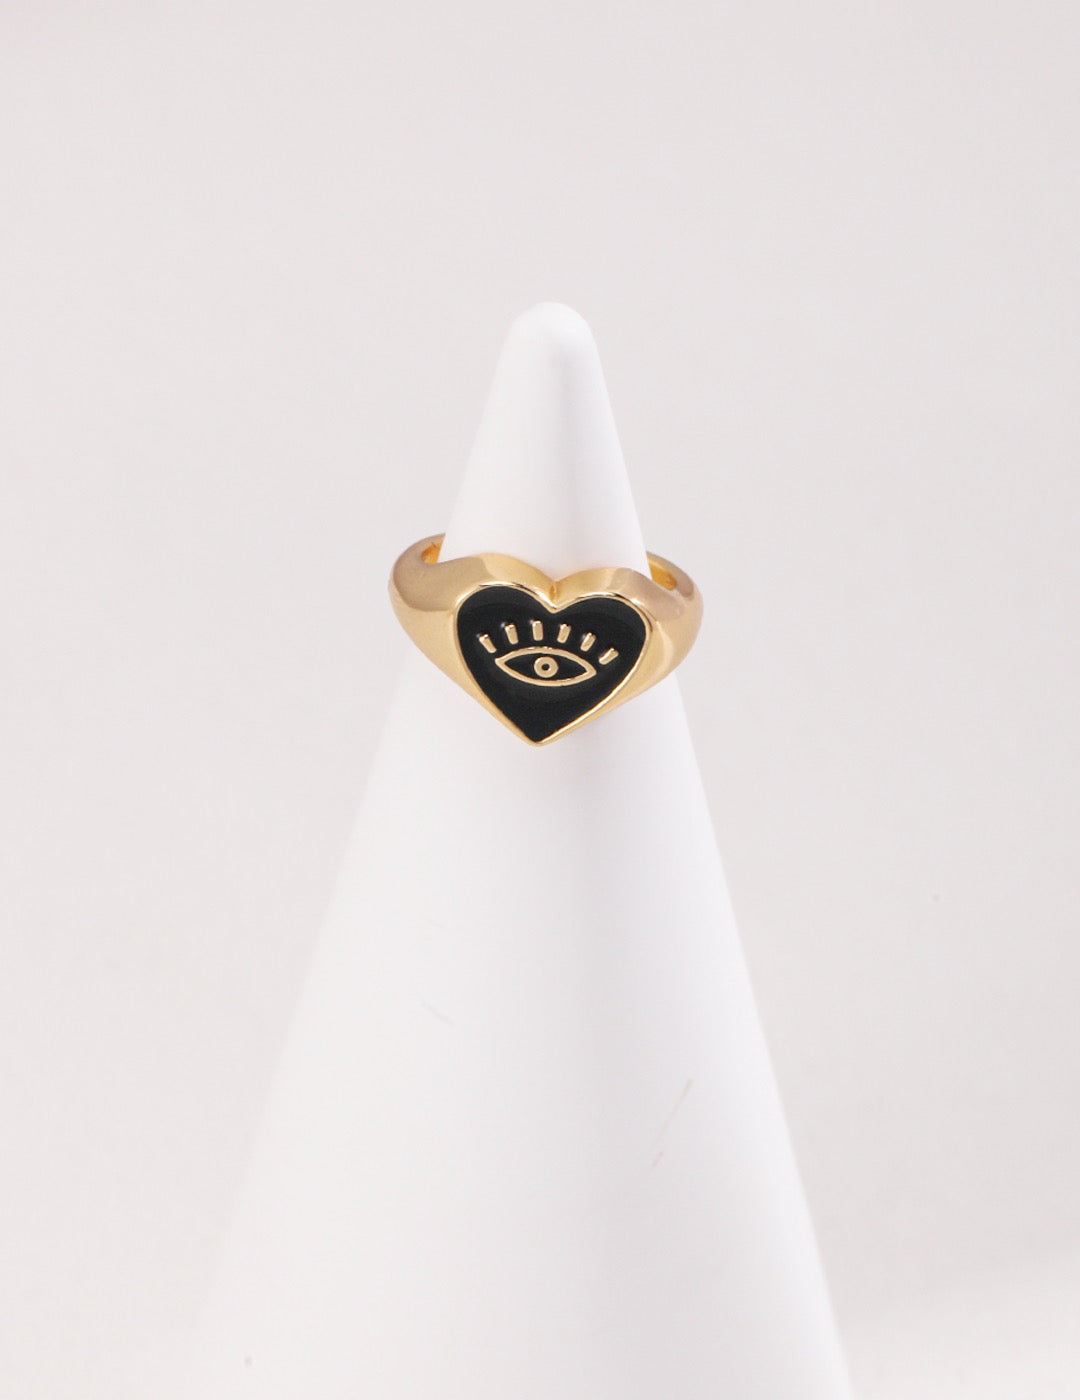 Sarah's Sterling Silver Drip Glaze Heart Ring